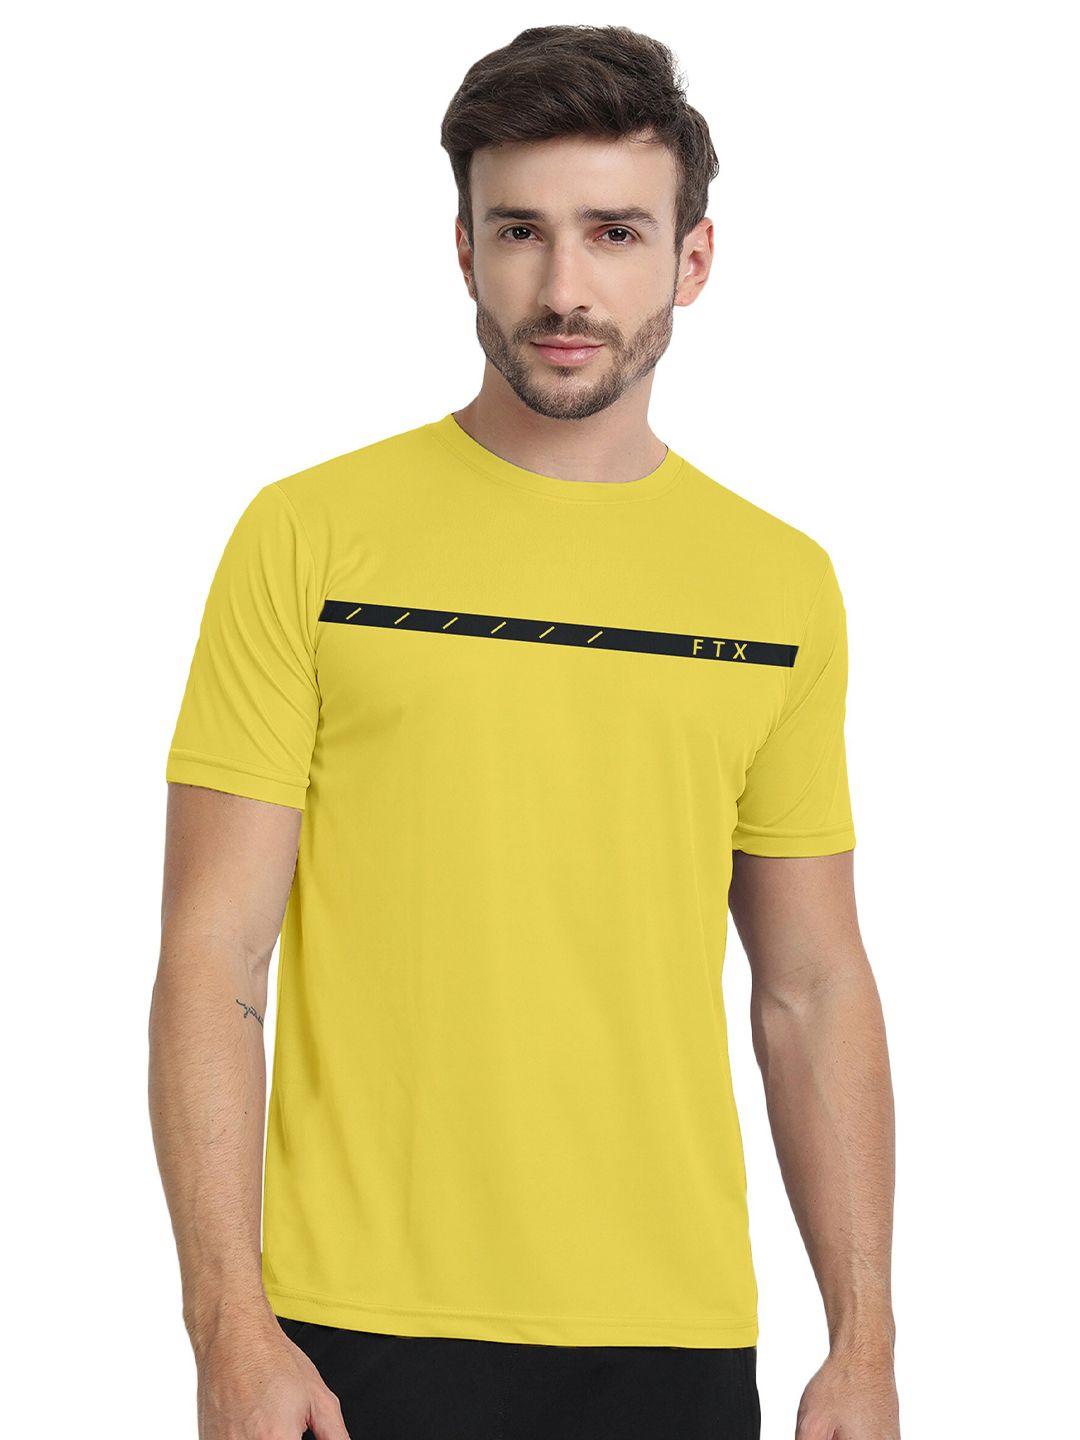 ftx round neck short sleeves t-shirt